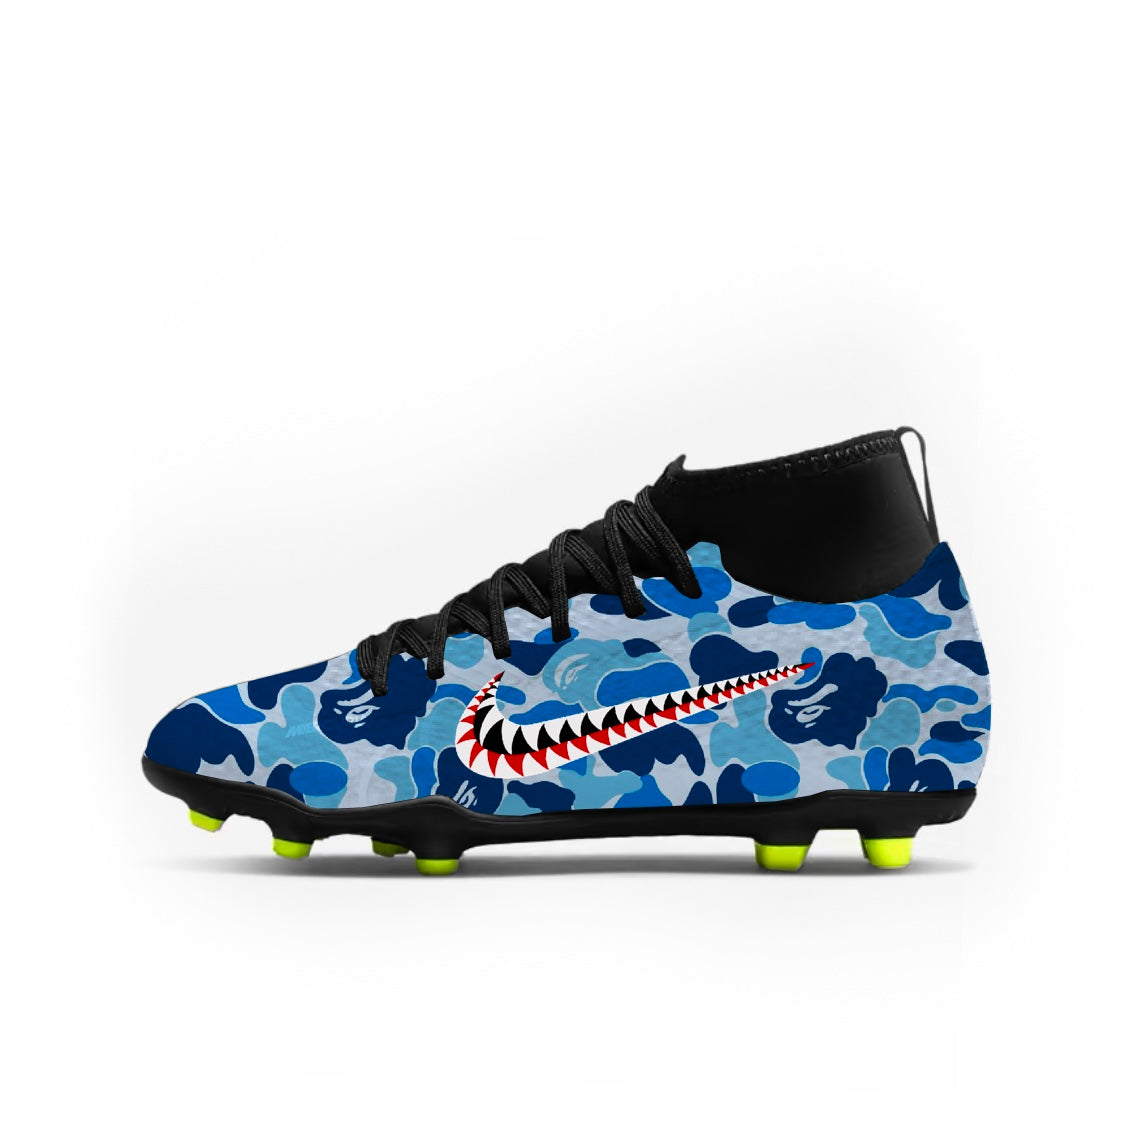 Designer Nike Youth Football Cleats 2.5Y / Blue